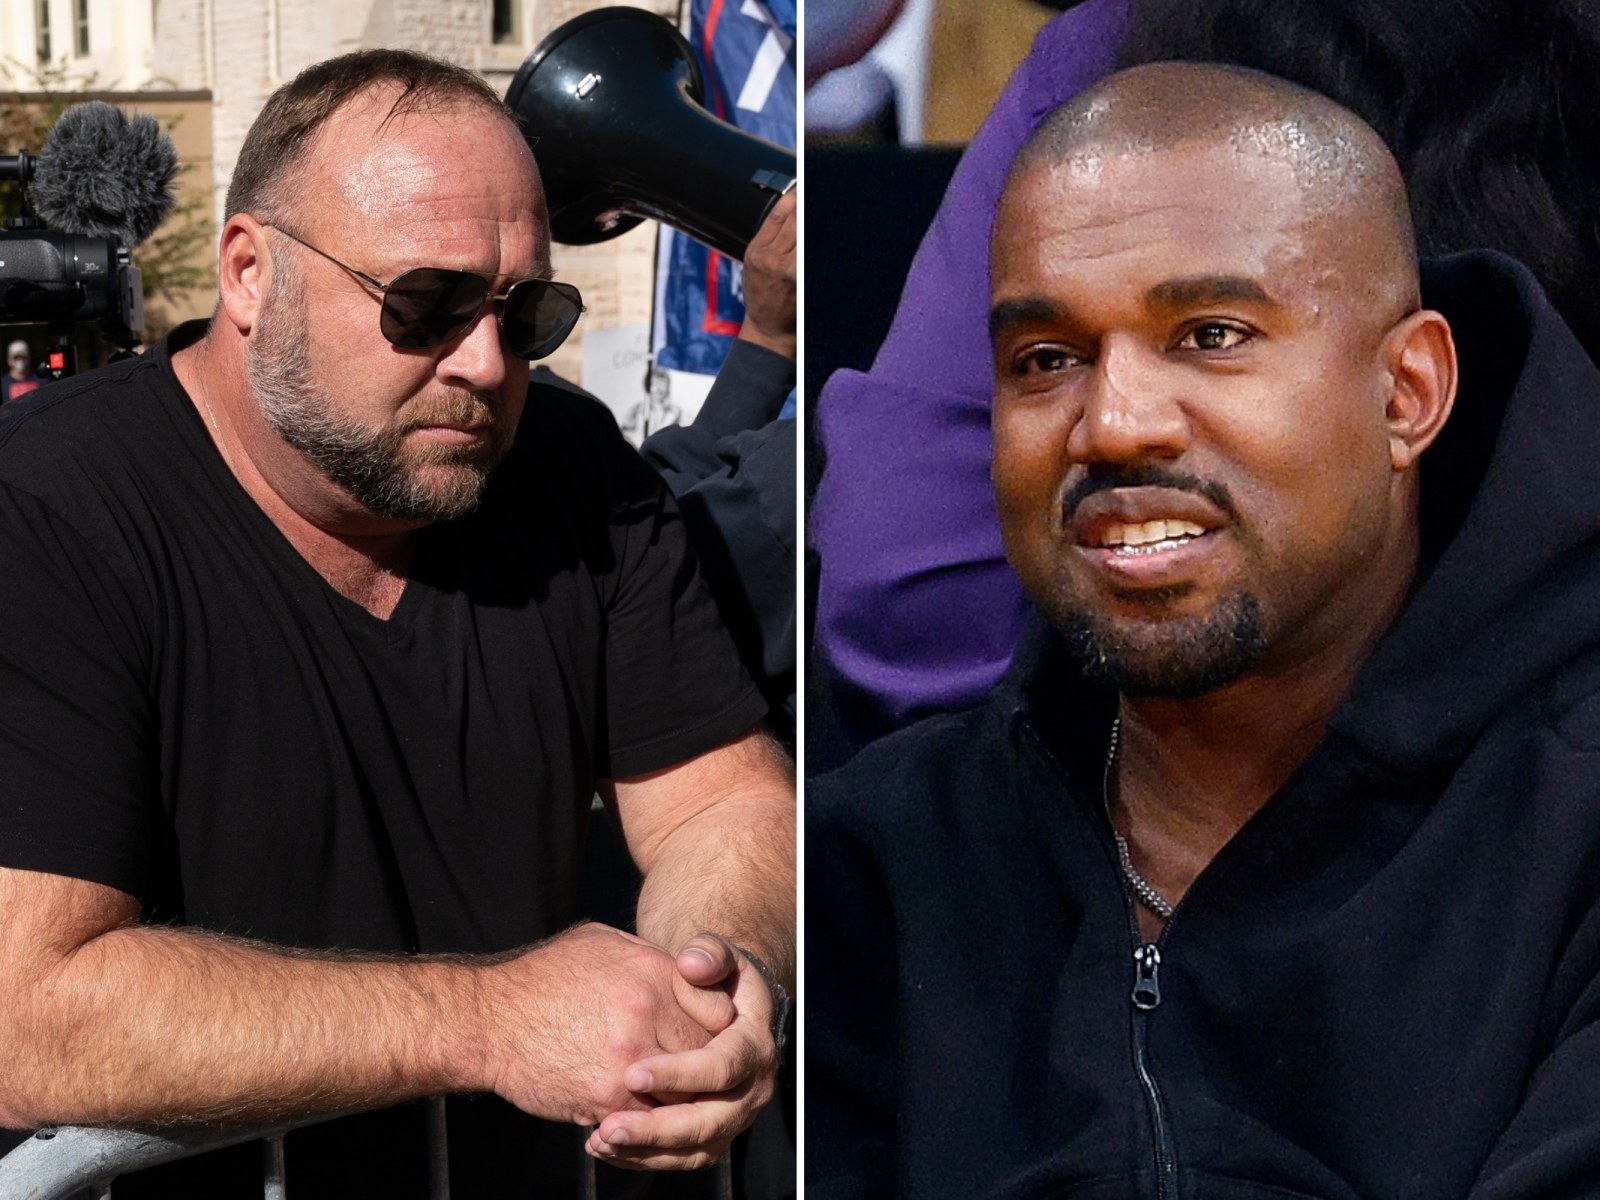 [WATCH/COMMENTARY] Kanye Says He 'Likes Hitler' In New Anti-Semitic Appearance On InfoWars